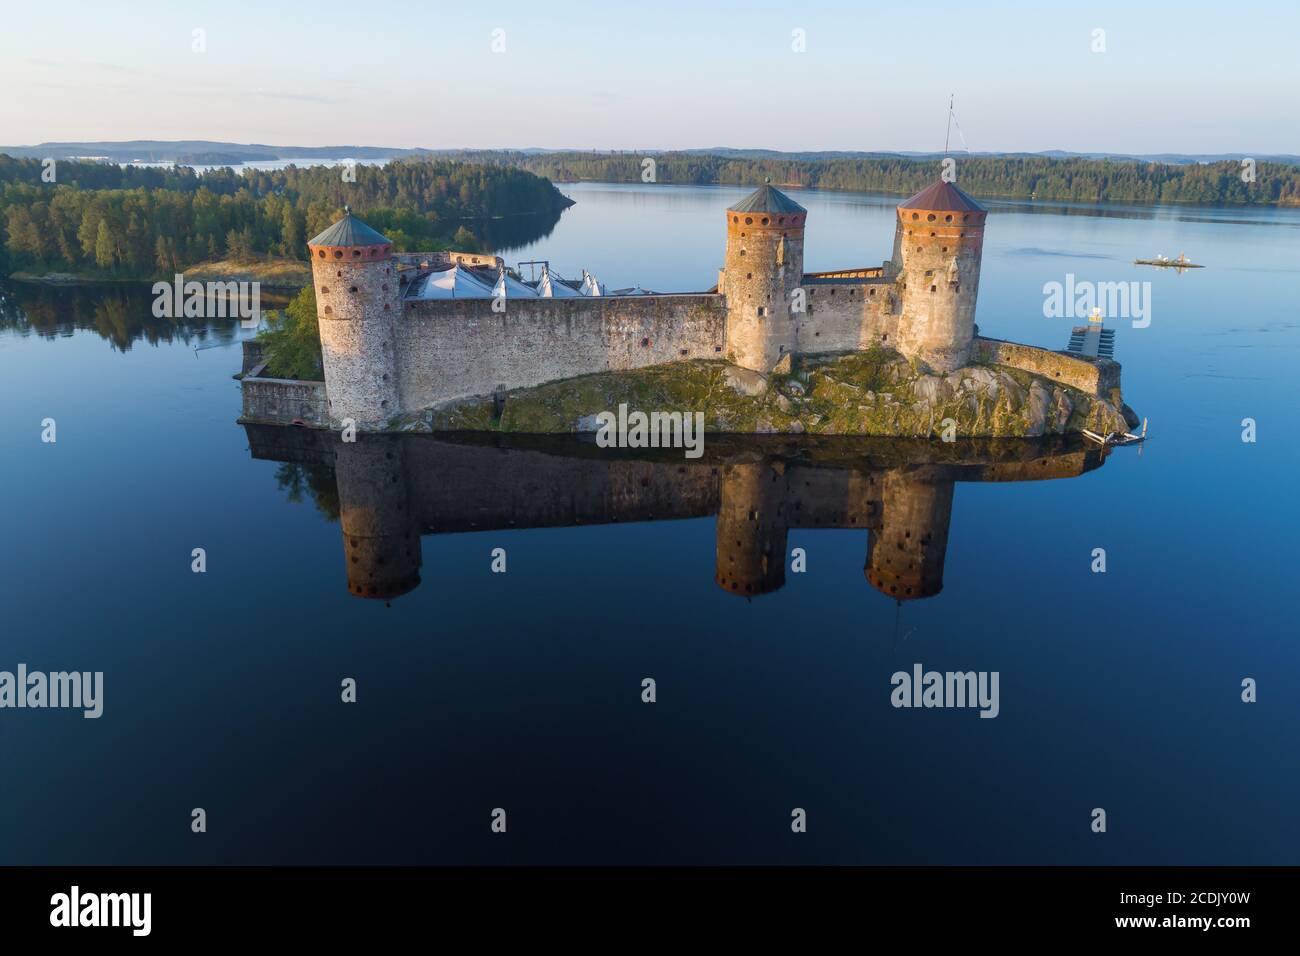 View of the medieval fortress of Olavinlinna early July morning (aerial photography). Savonlinna, Finland Stock Photo